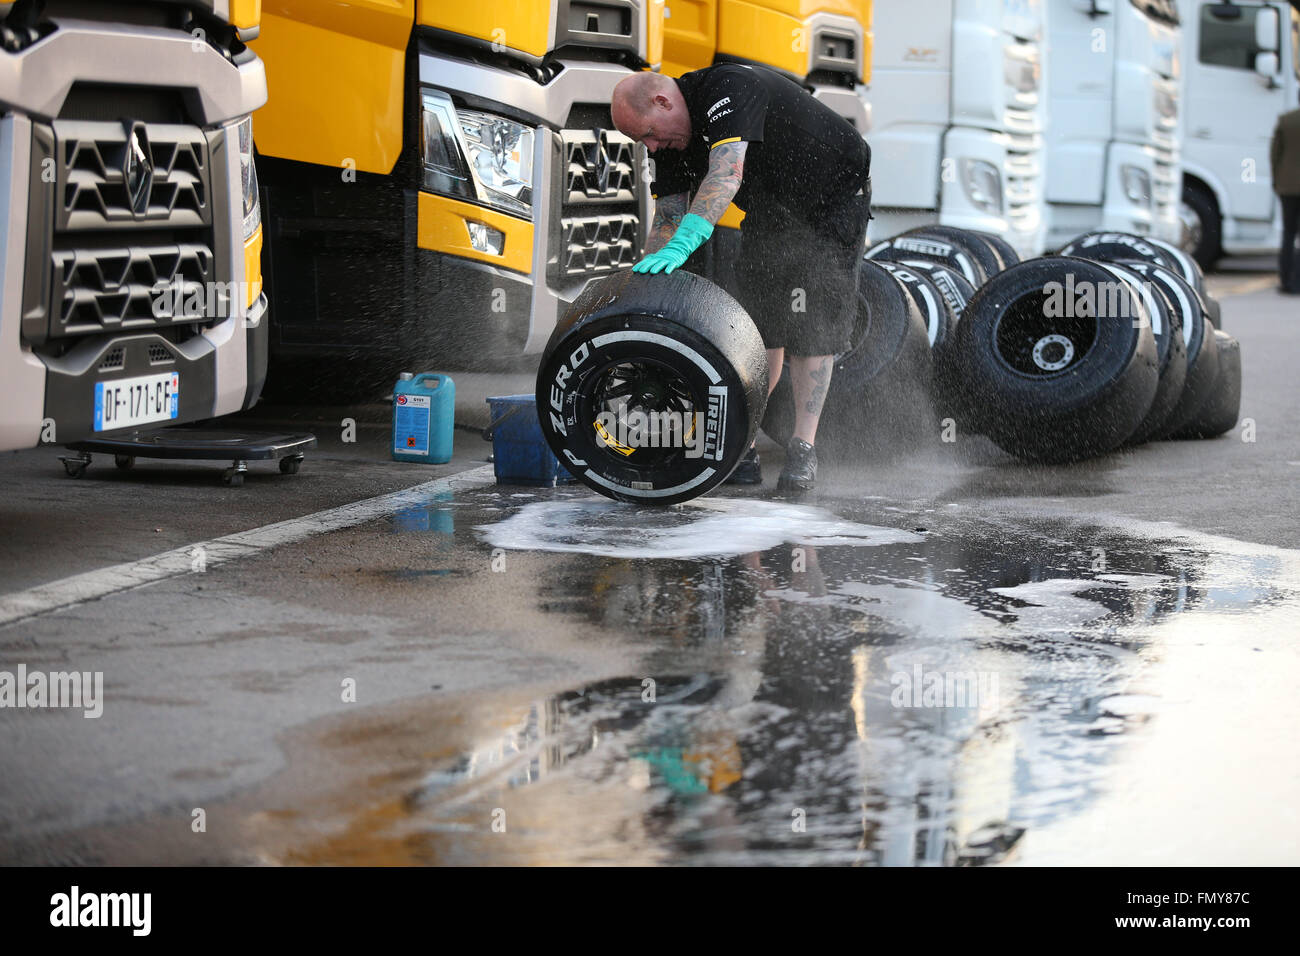 Racing tires from Pirelli seen during the training session for the upcoming Formula One season at the Circuit de Barcelona - Catalunya in Barcelona, Spain, 24 February 2016. Photo: Jens Buettner/dpa Stock Photo